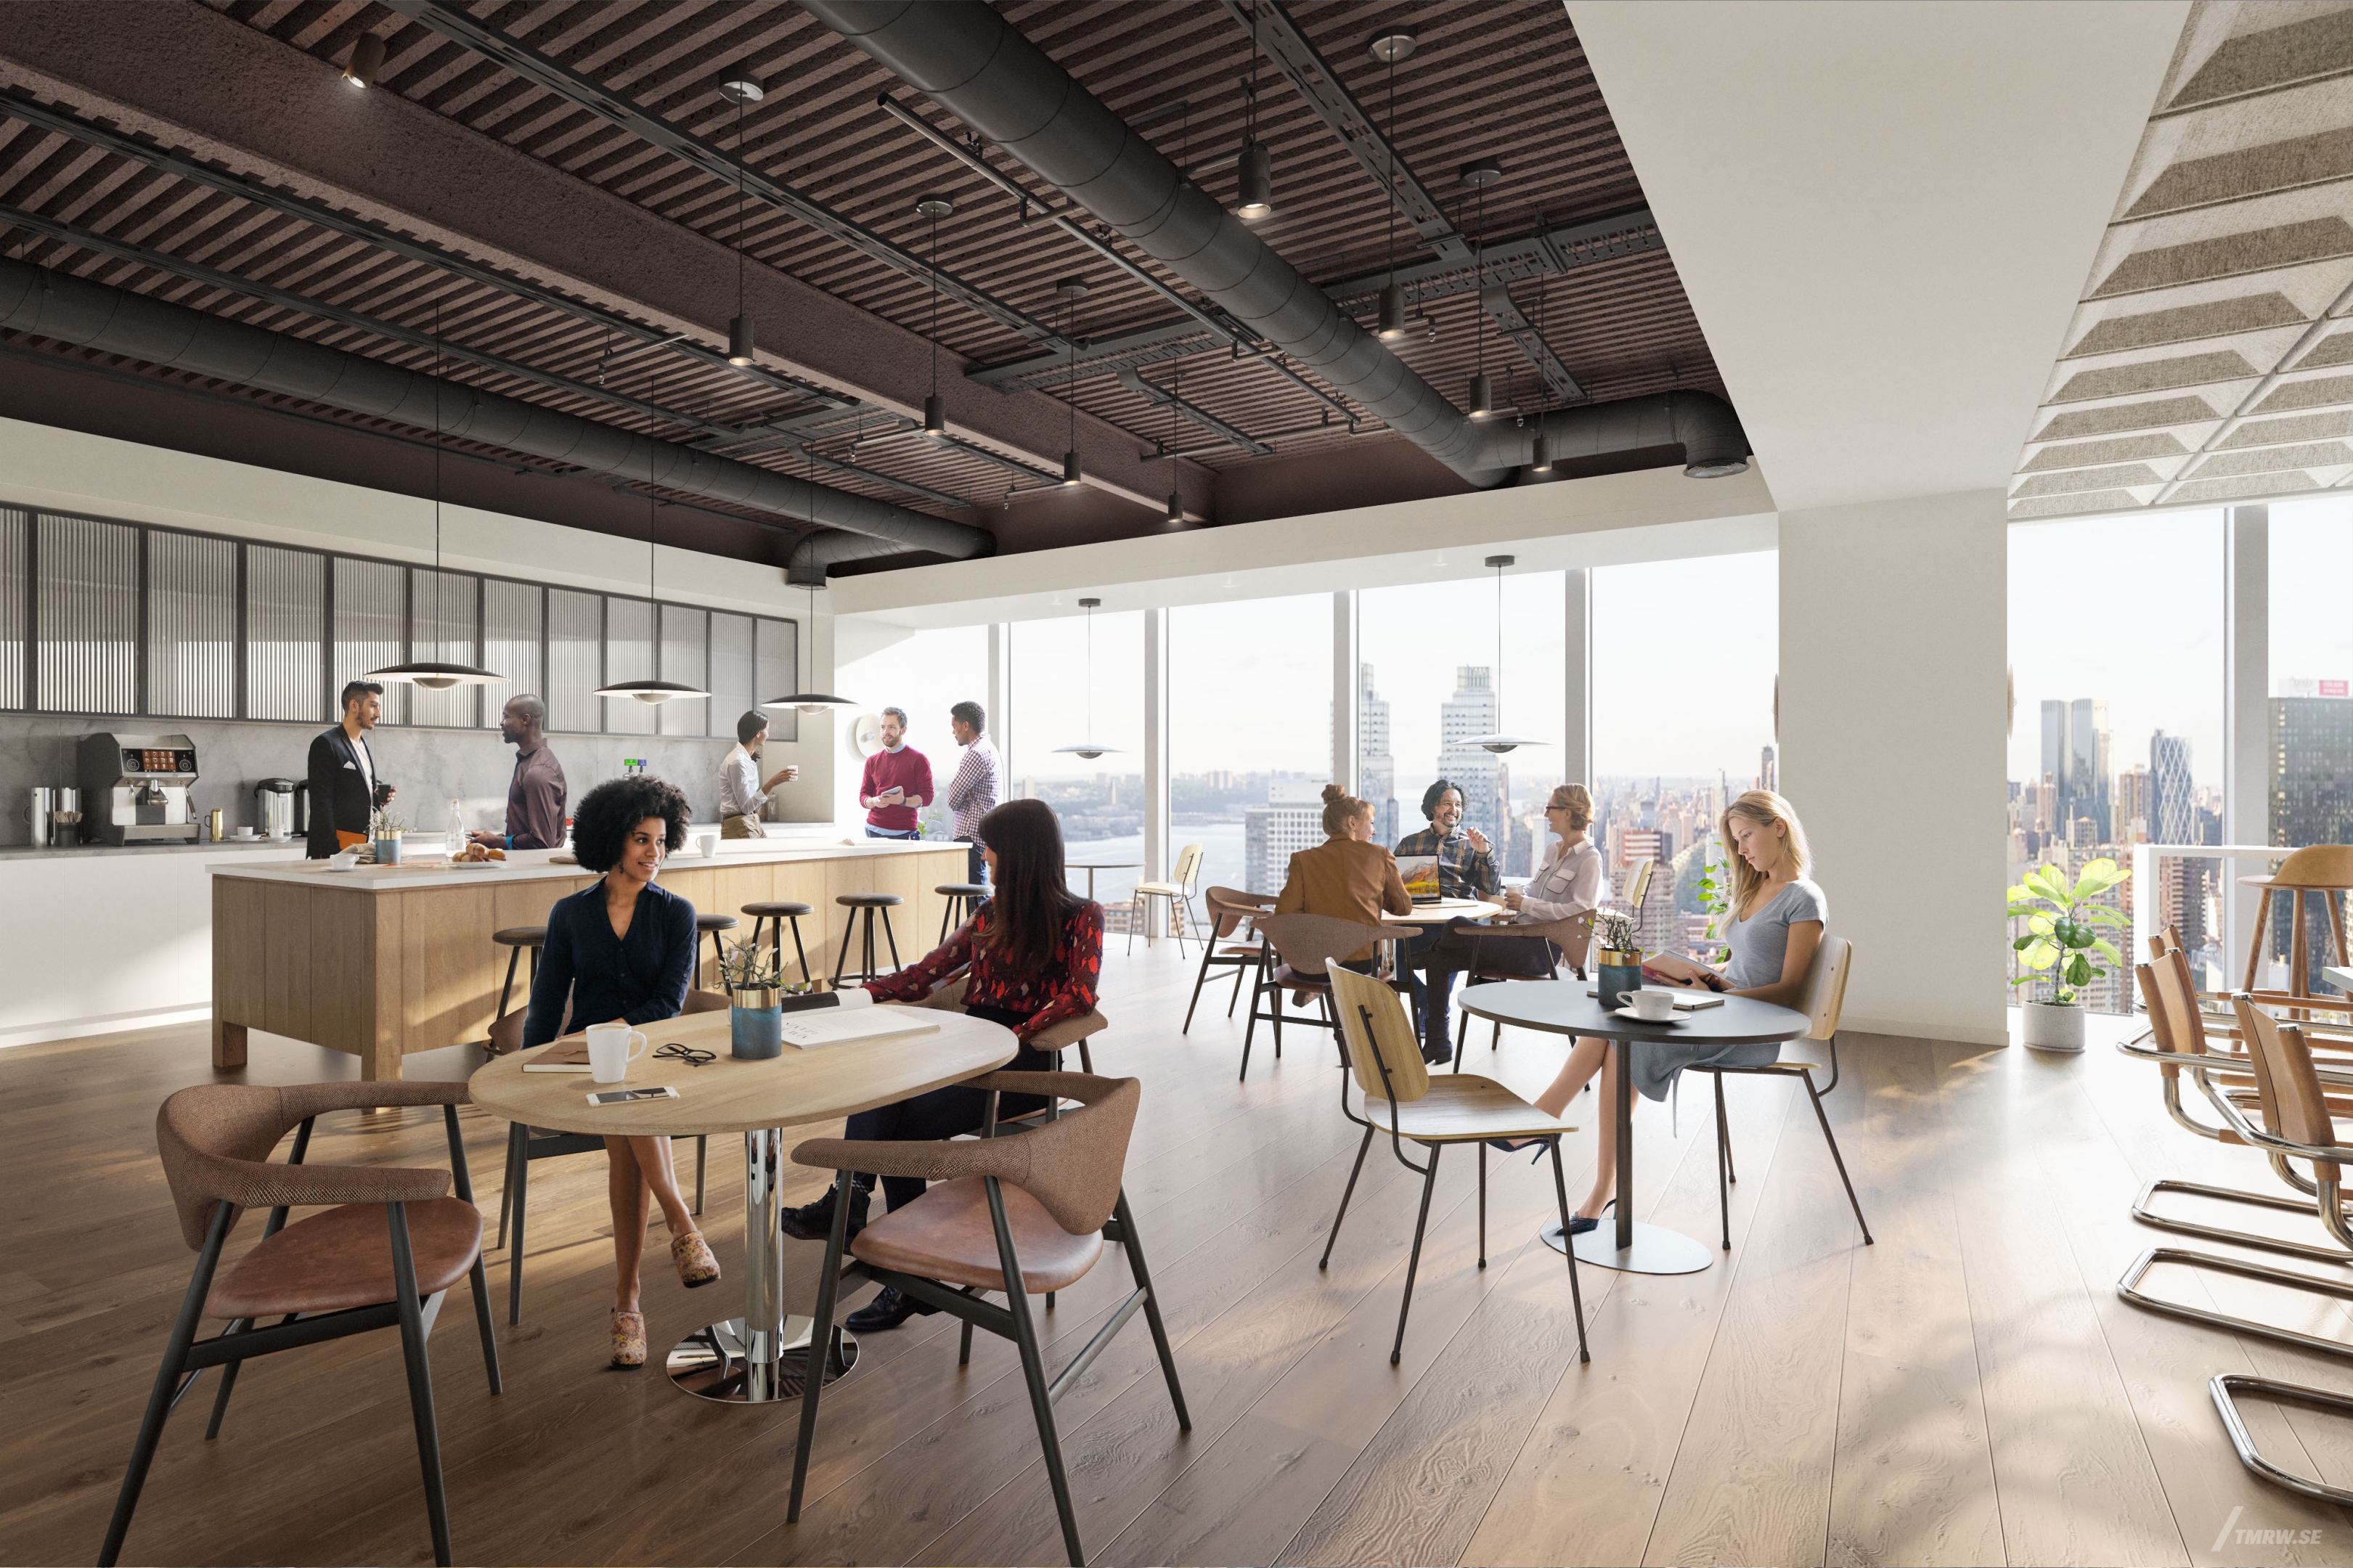 Architectural visualization of OMW for Brookfield Properties. An image of the interior of a office with people sitting the kitchen in daylight.